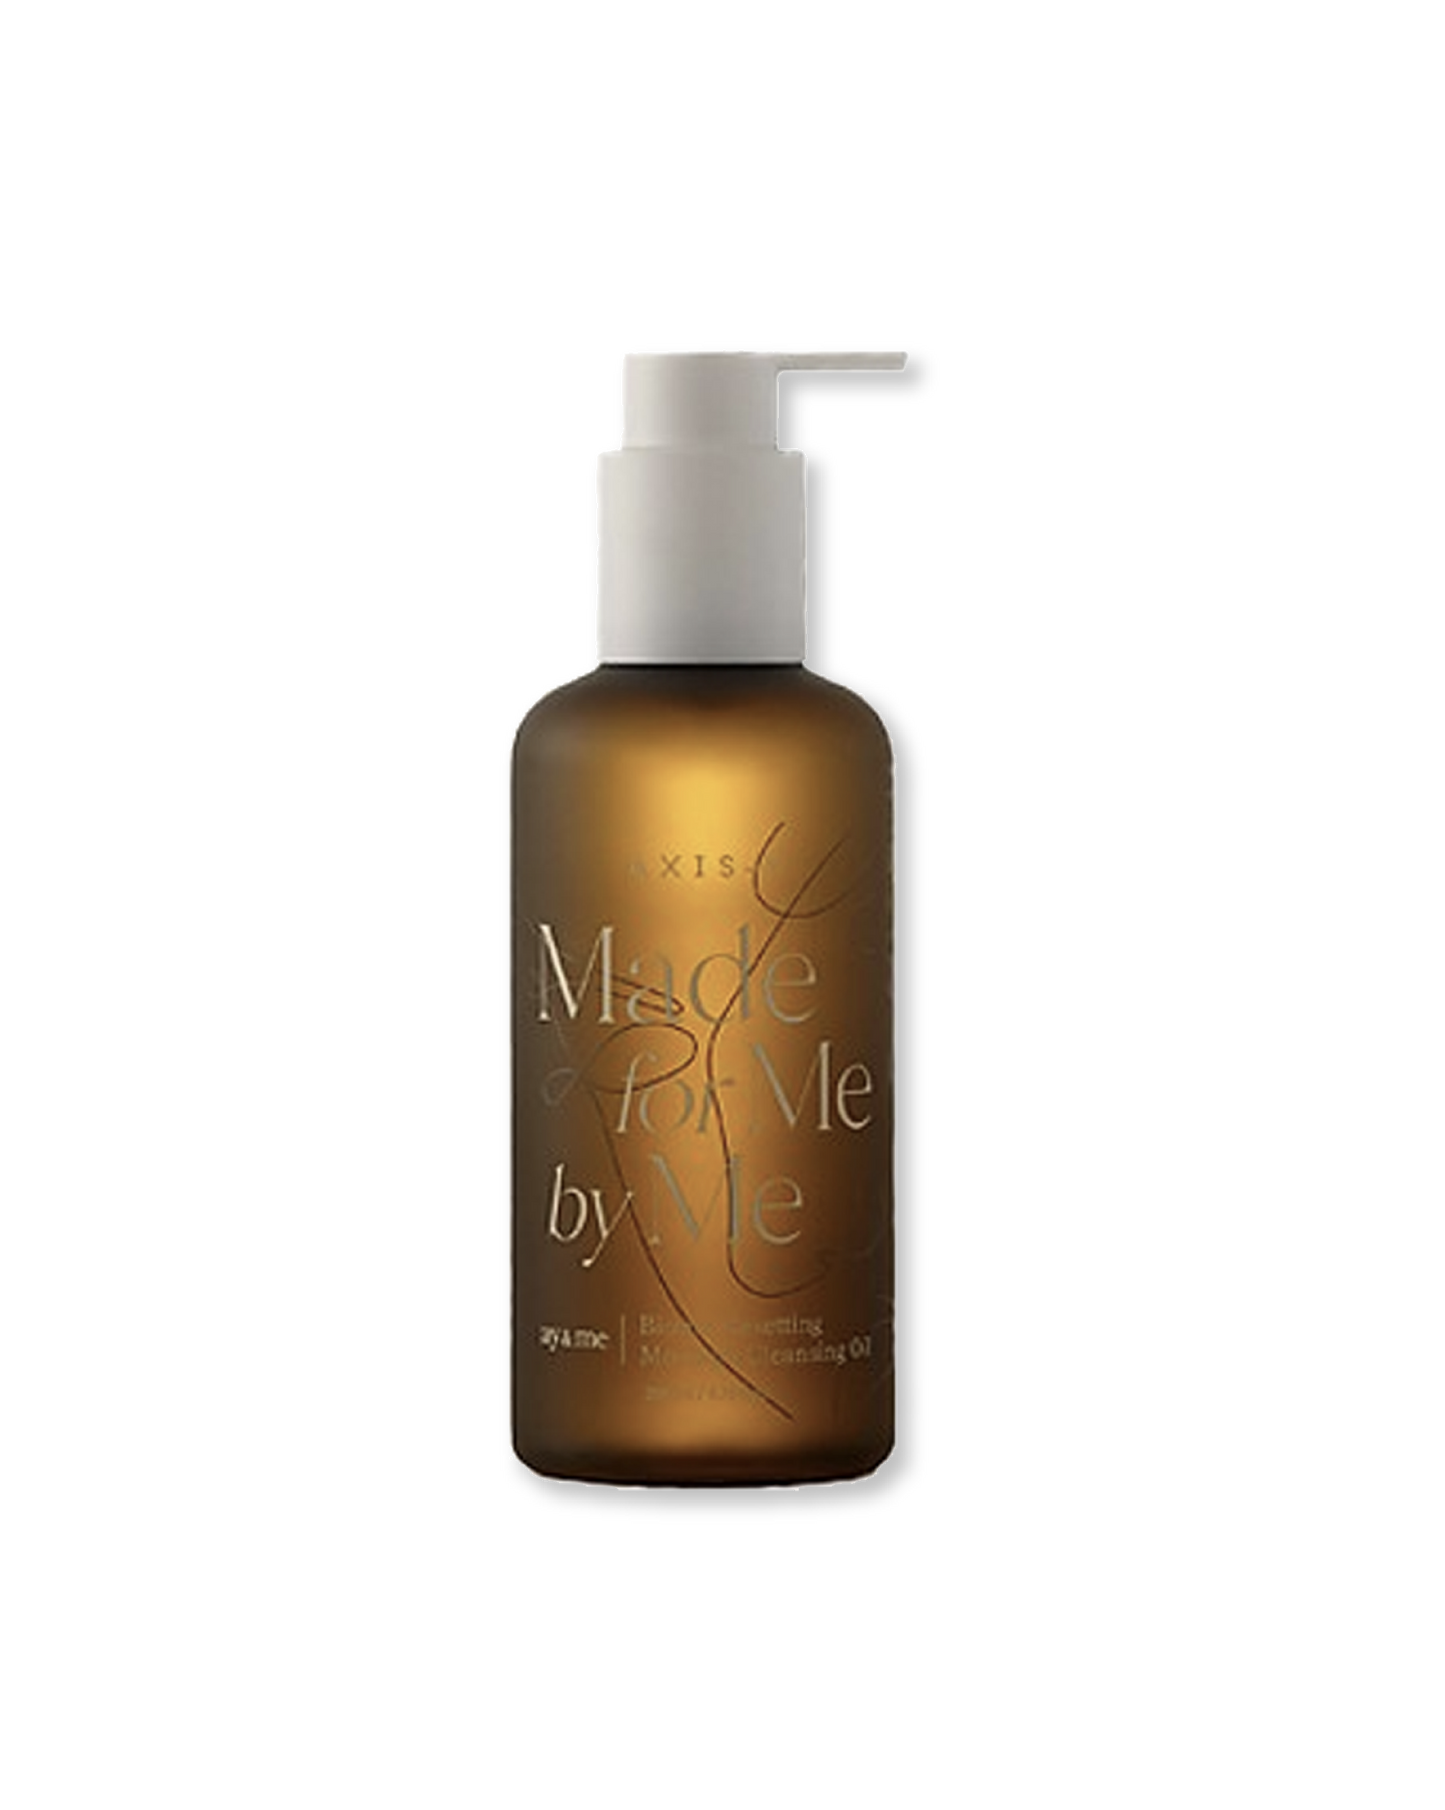 AXIS-Y Biome Resetting Moringa Cleansing Oil